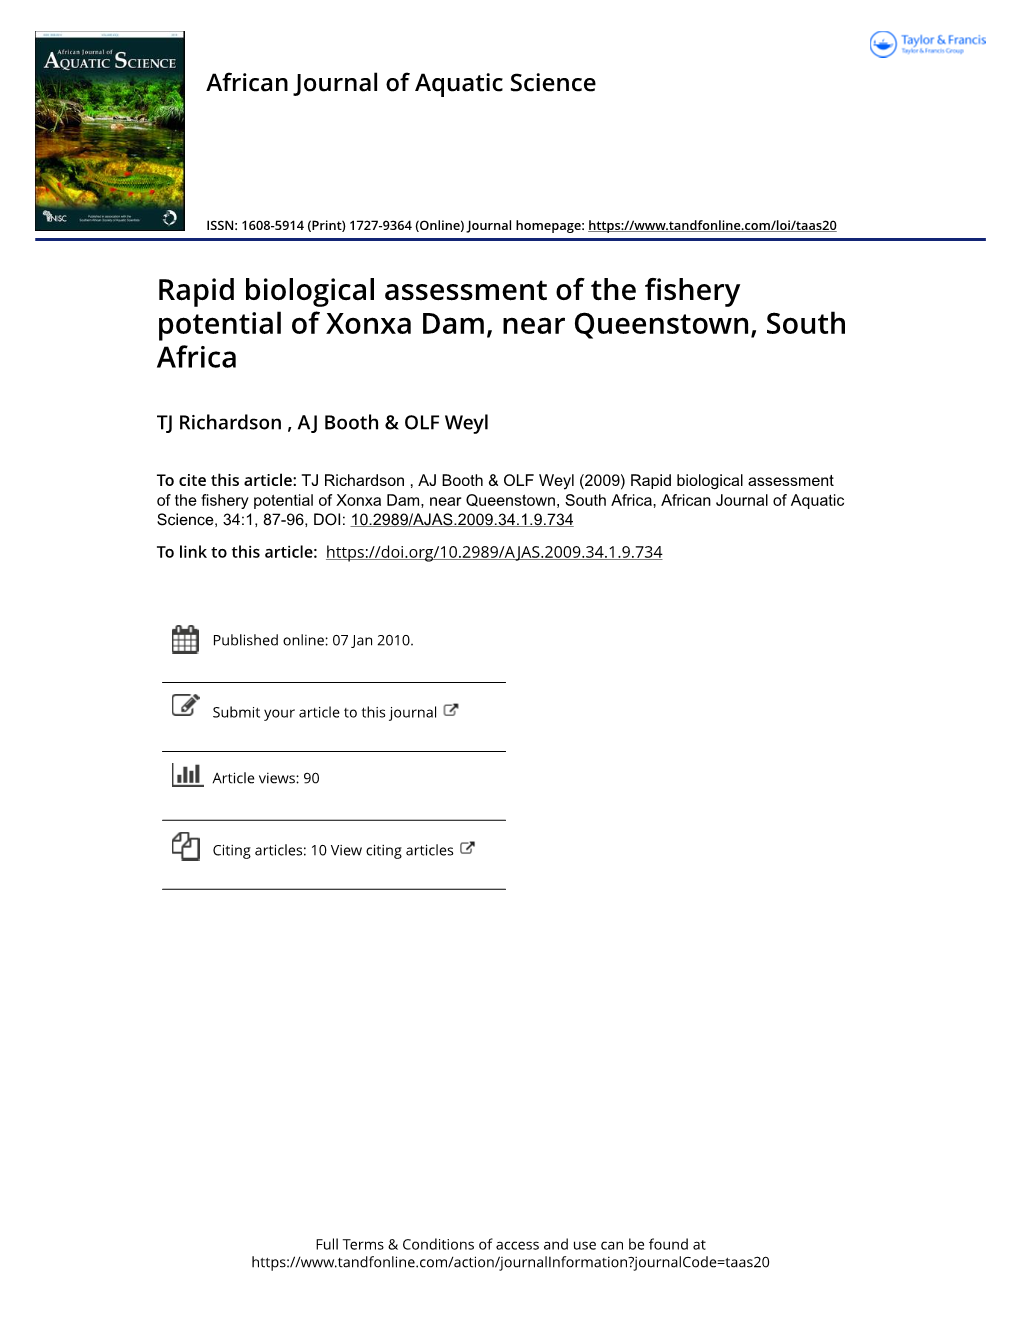 Rapid Biological Assessment of the Fishery Potential of Xonxa Dam, Near Queenstown, South Africa